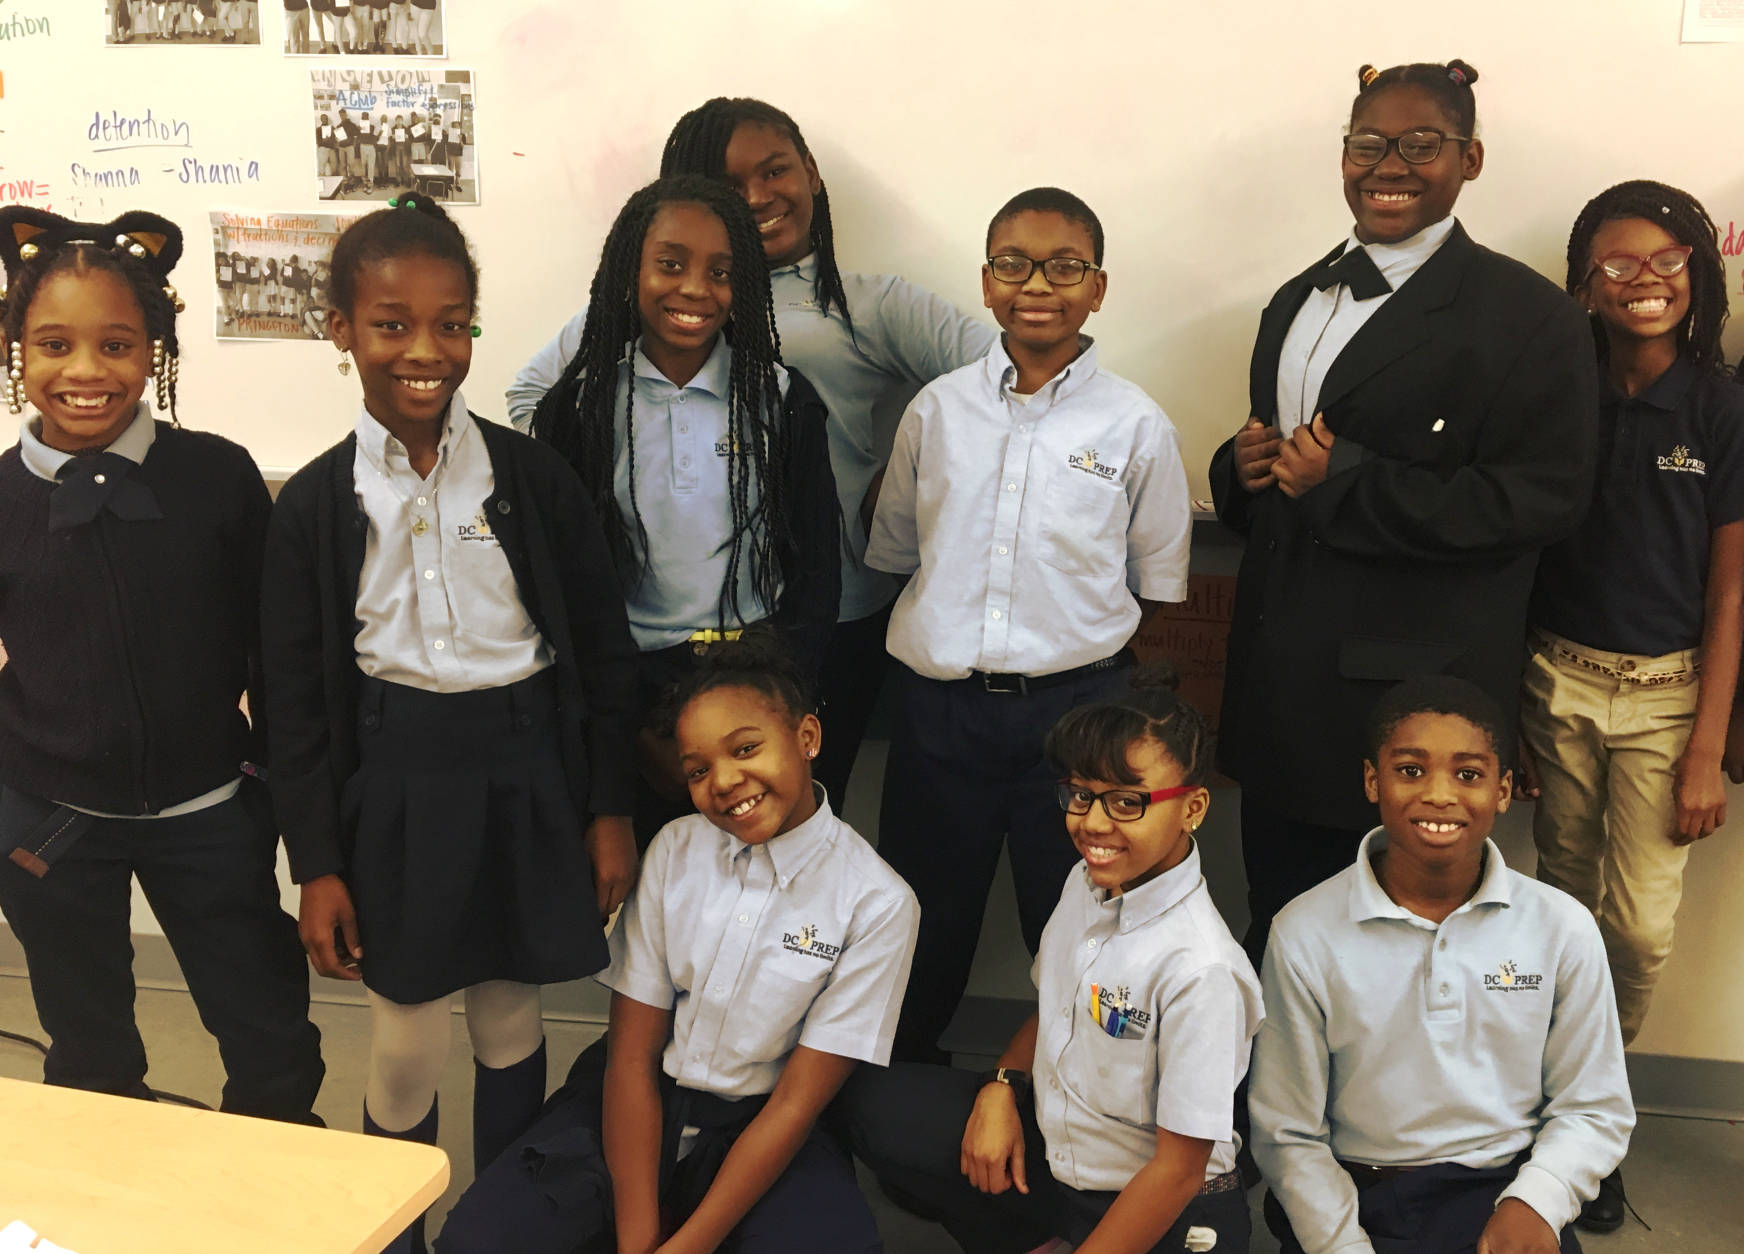 At DC Prep’s Benning Middle Campus, located in Ward 7, students in 4th-7th grade are participating in the school’s inaugural Student Council during this 2016-17 academic year. (Courtesy Amber Walker)